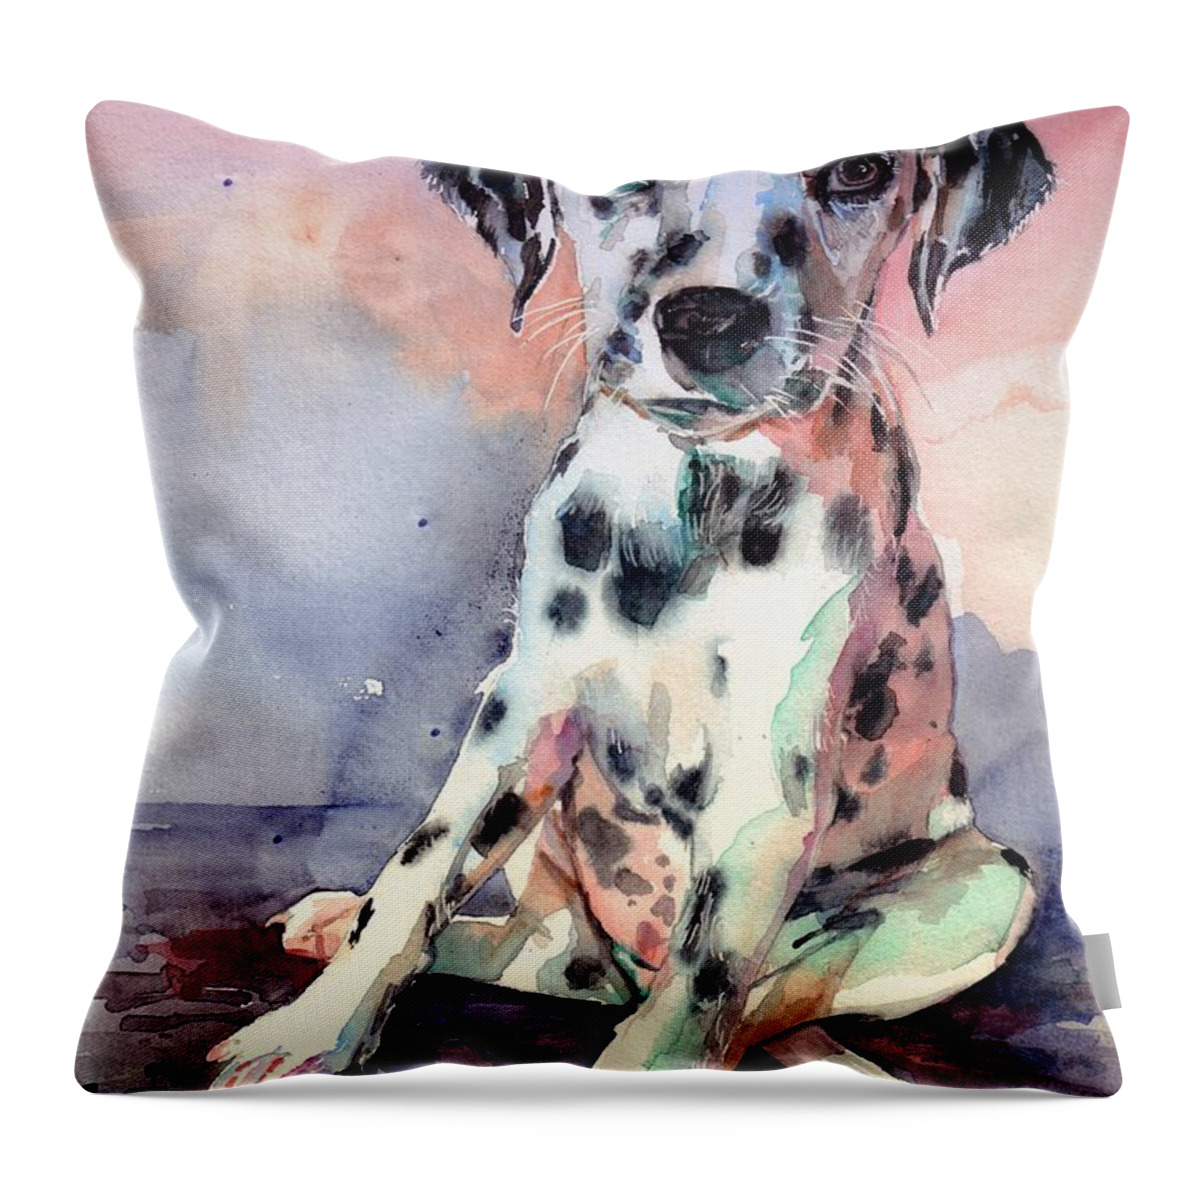 Dalmatian Throw Pillow featuring the painting Dalmatian Puppy by Suzann Sines